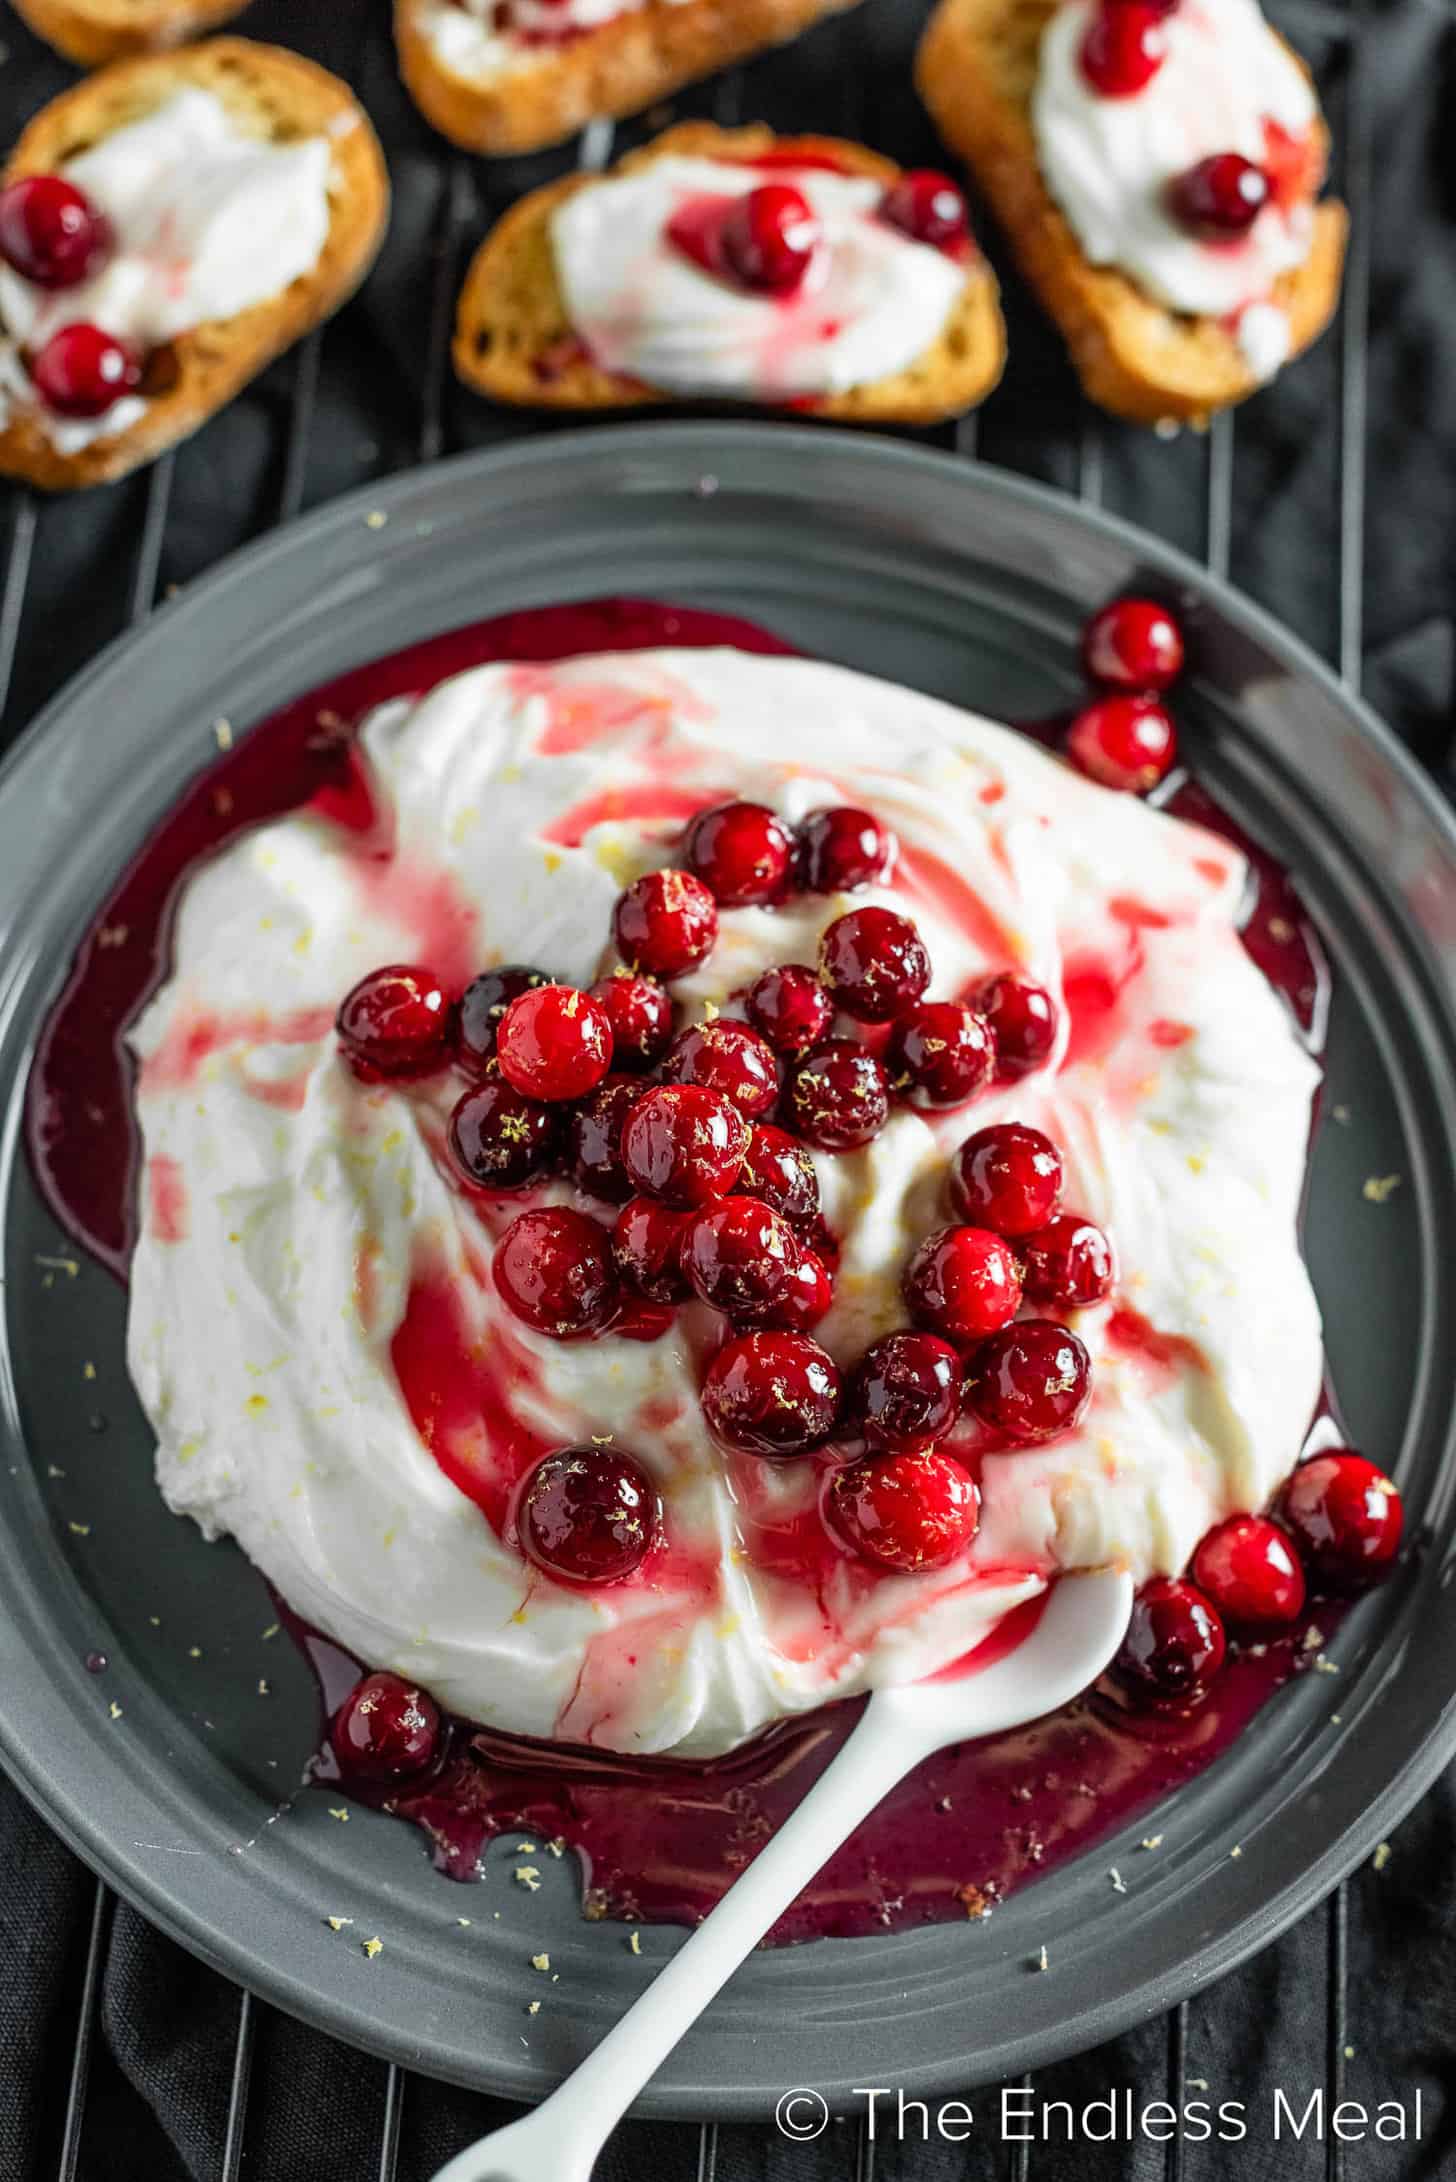 Whipped Lemon Ricotta topped with cranberries